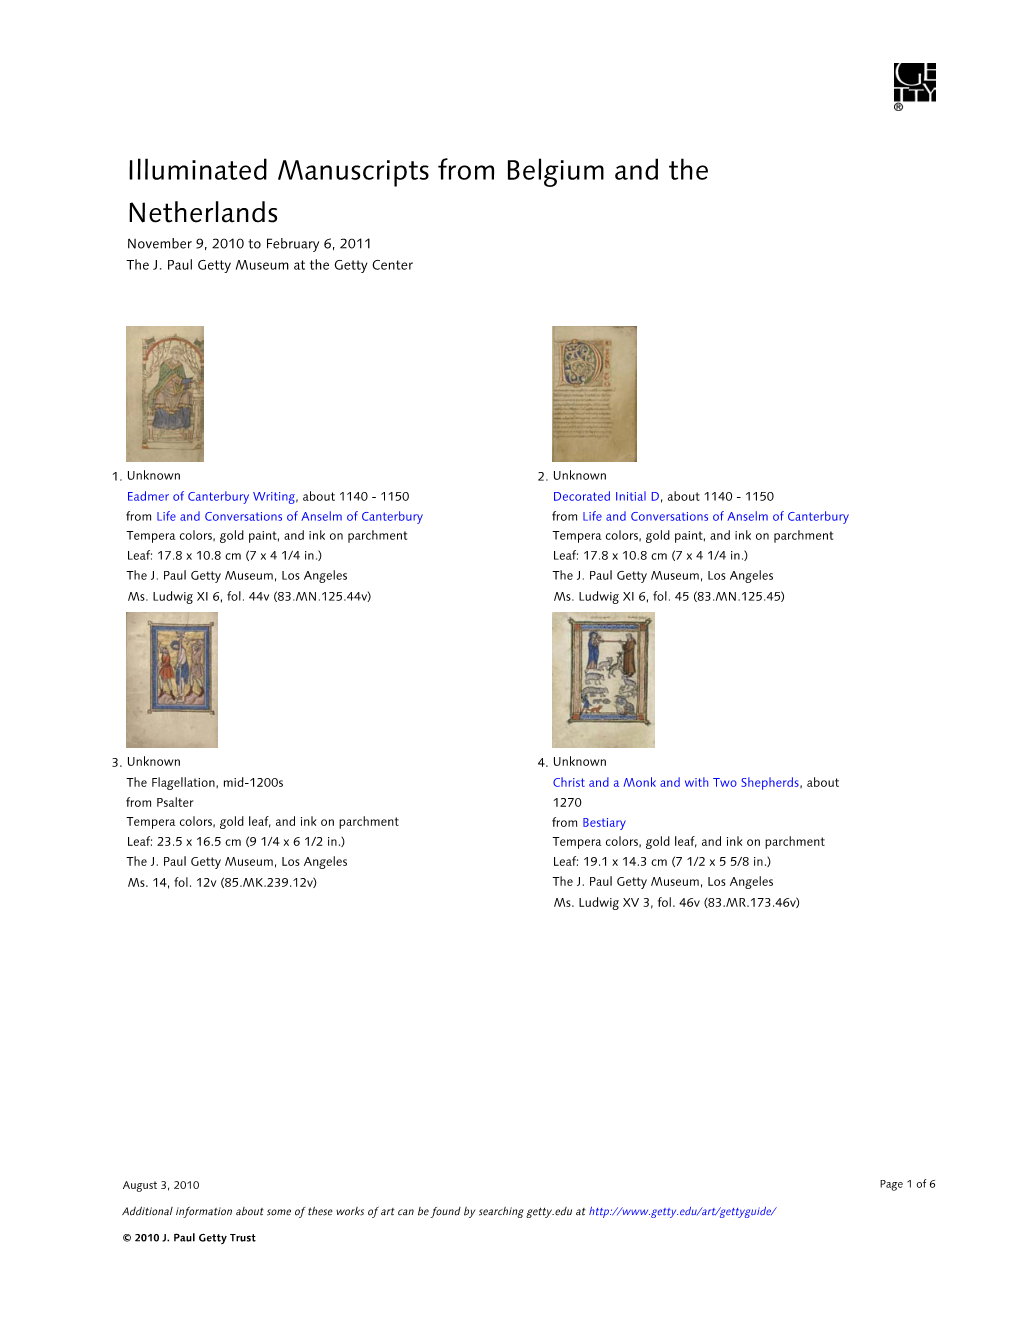 Illuminated Manuscripts from Belgium and the Netherlands November 9, 2010 to February 6, 2011 the J